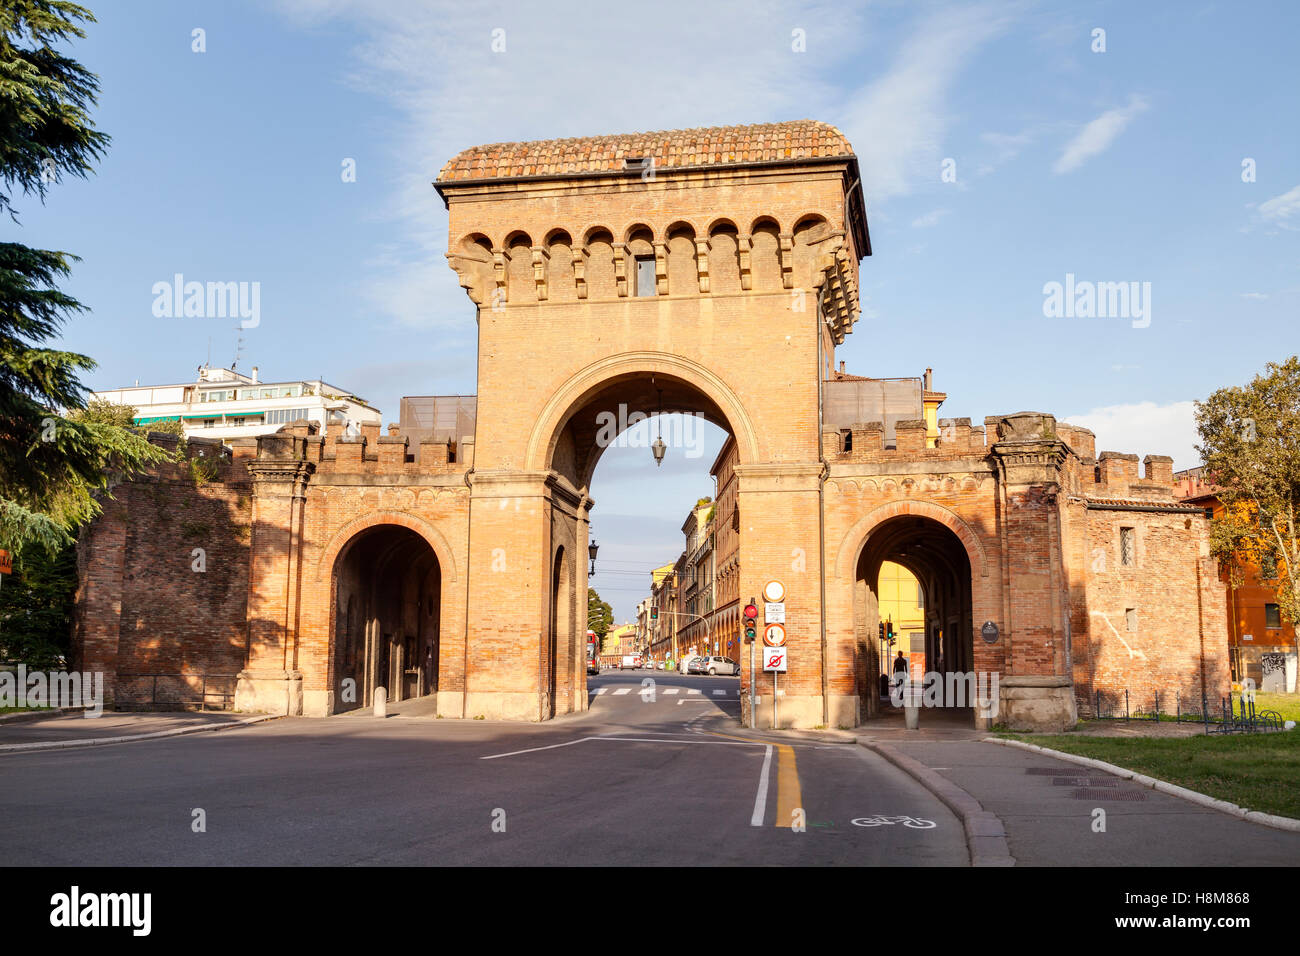 Porta Saragozza in Bologna. It was one of the portals or gateways in the medieval walls of this city. Stock Photo